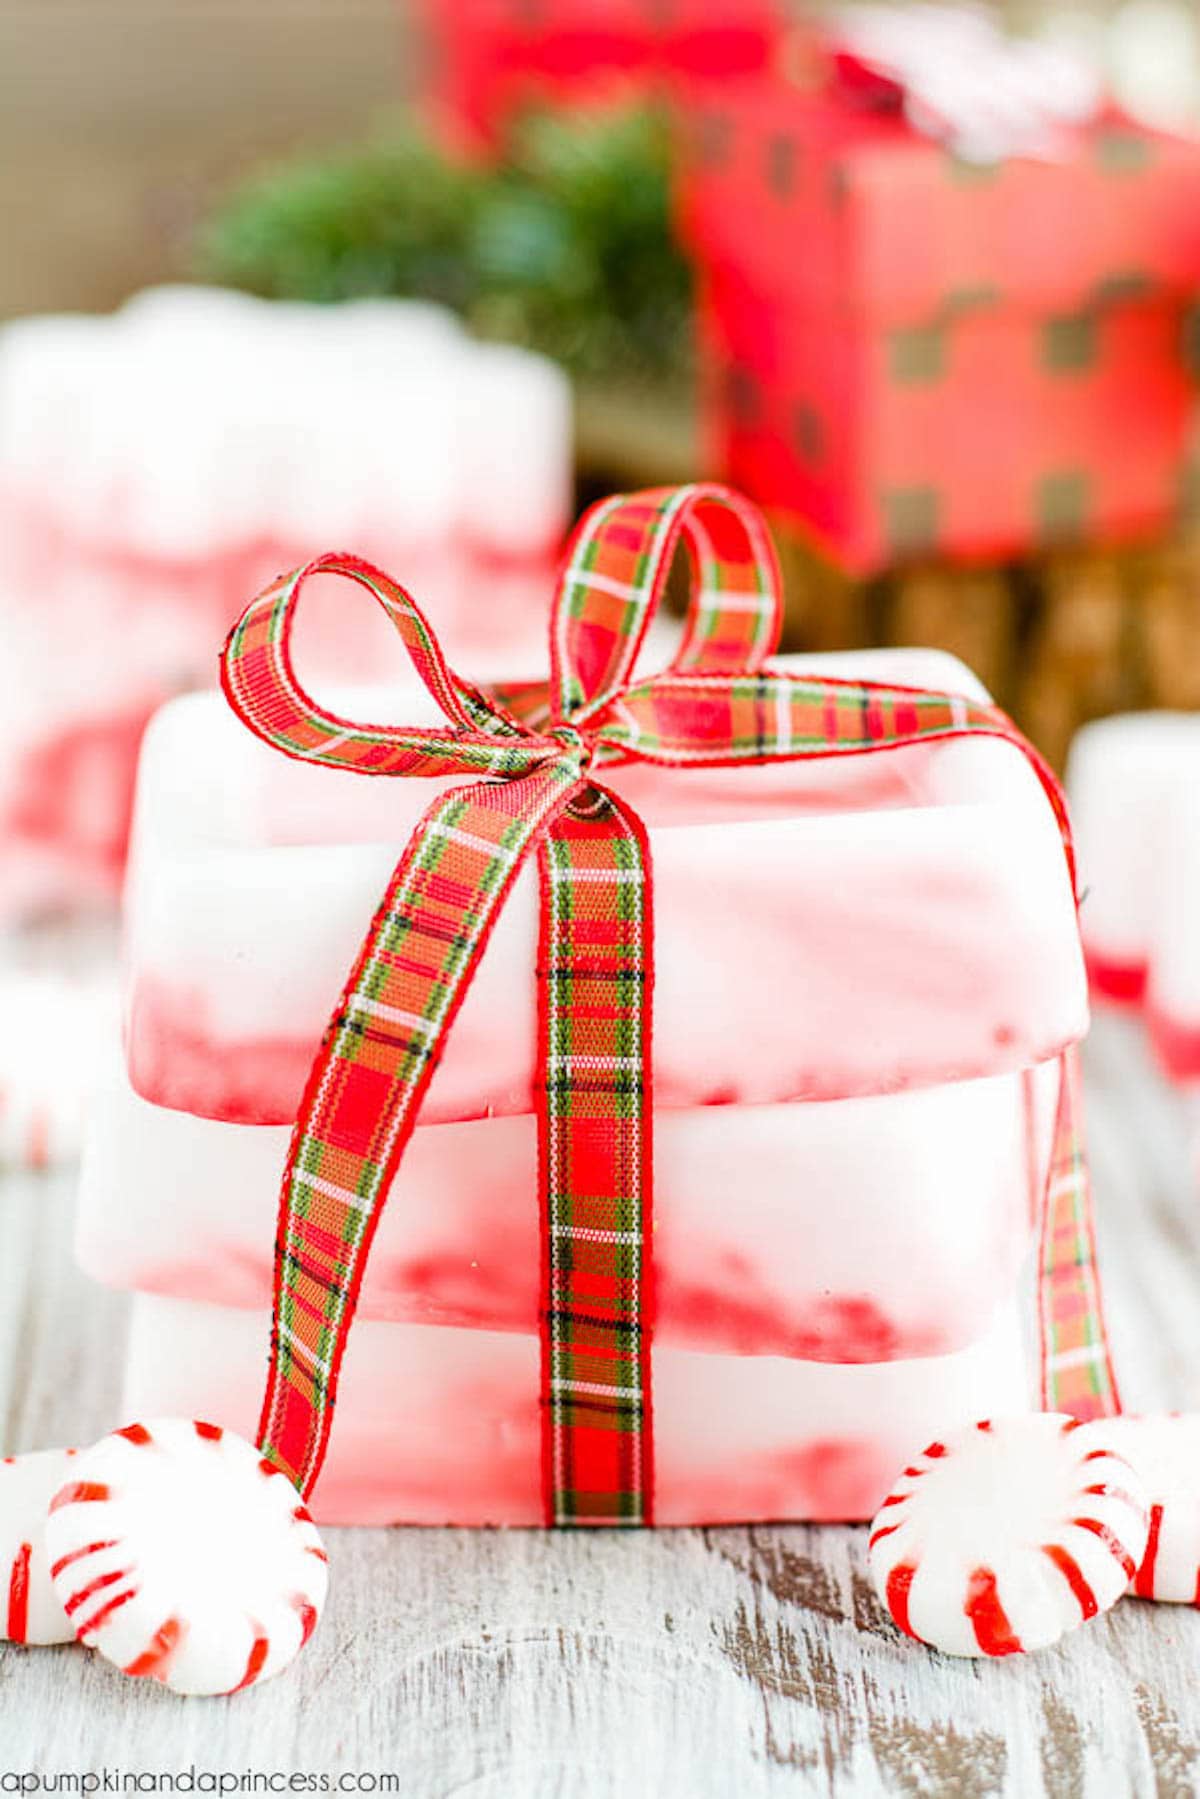 15 Christmas Crafts To Make & Gift This Year »Read More